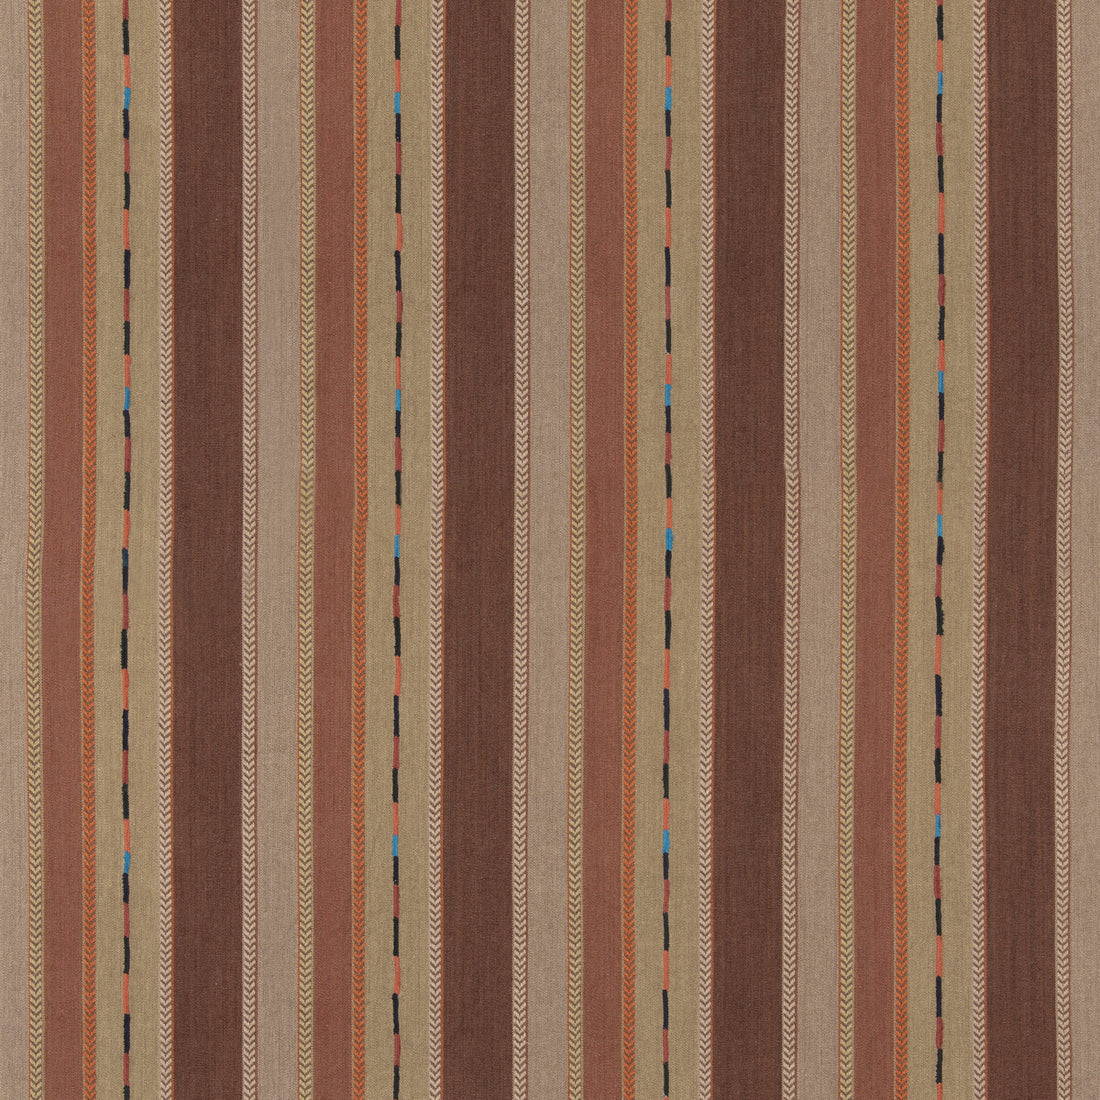 Bunty fabric in brown color - pattern BF11062.5.0 - by G P &amp; J Baker in the X Kit Kemp Stripes collection